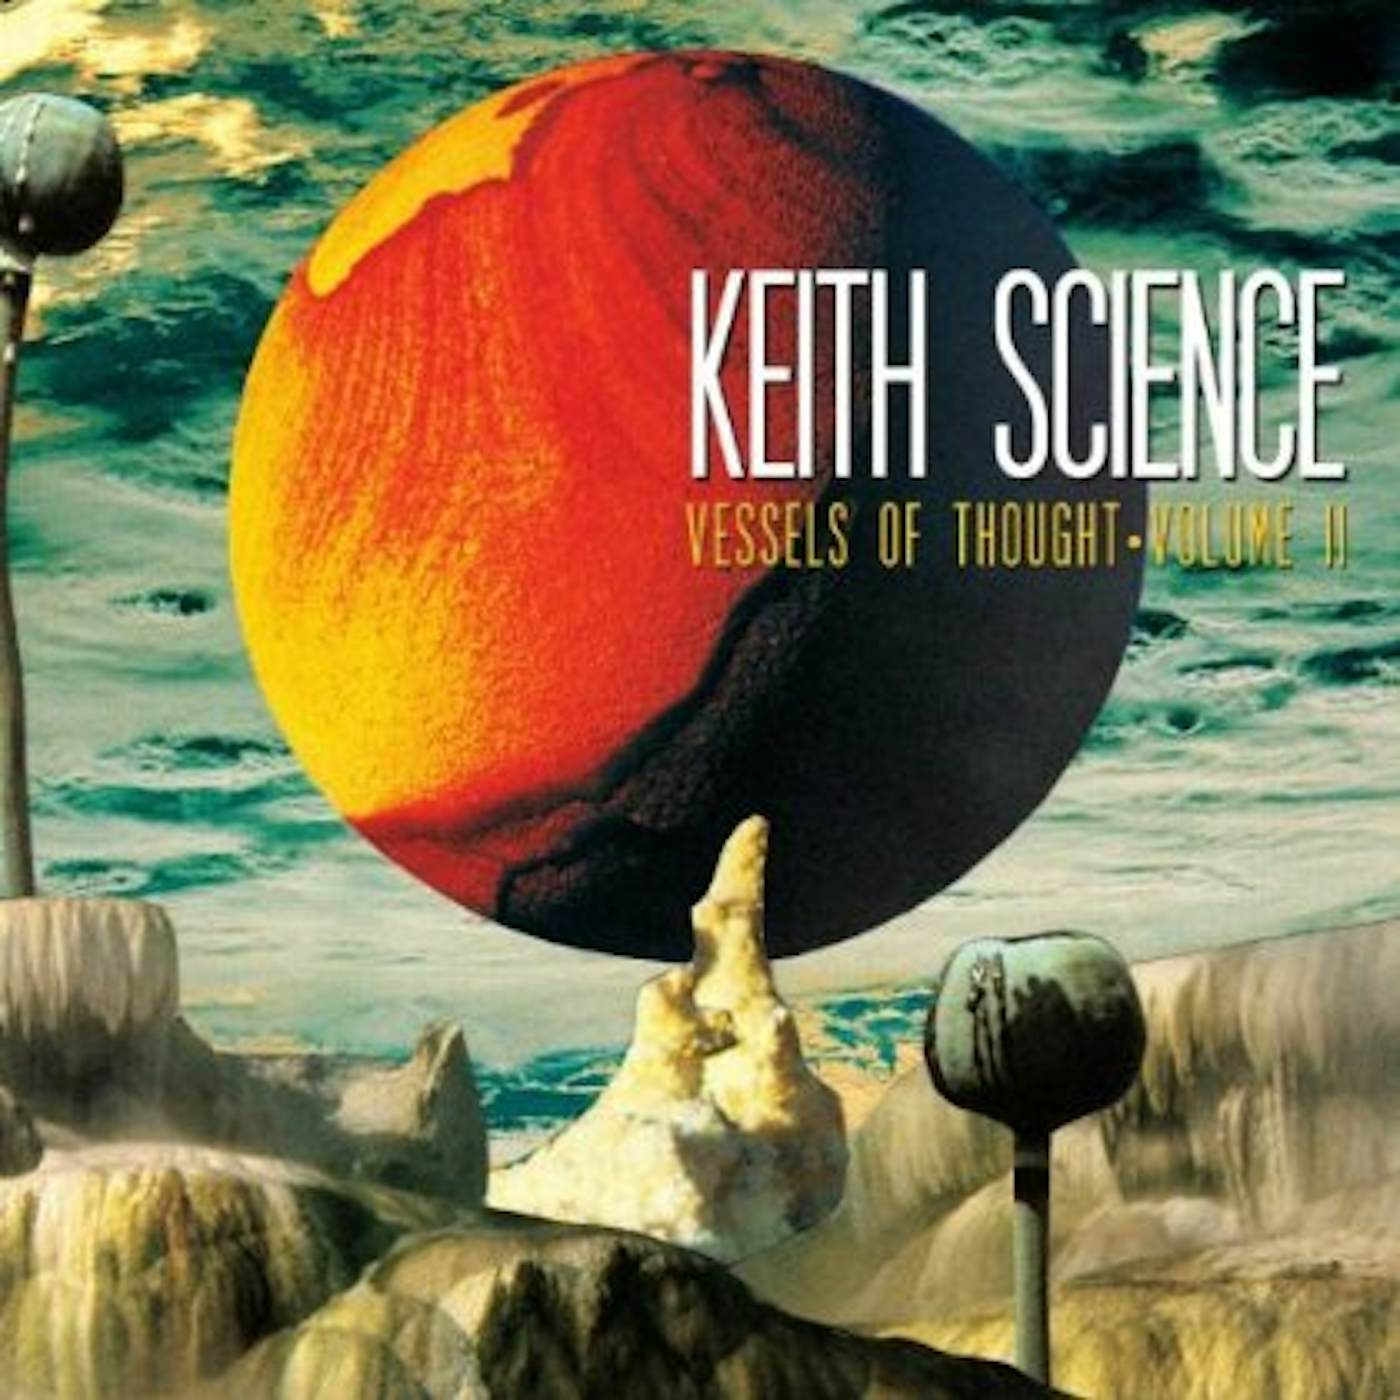 Keith Science VESSELS OF THOUGHT 2 CD